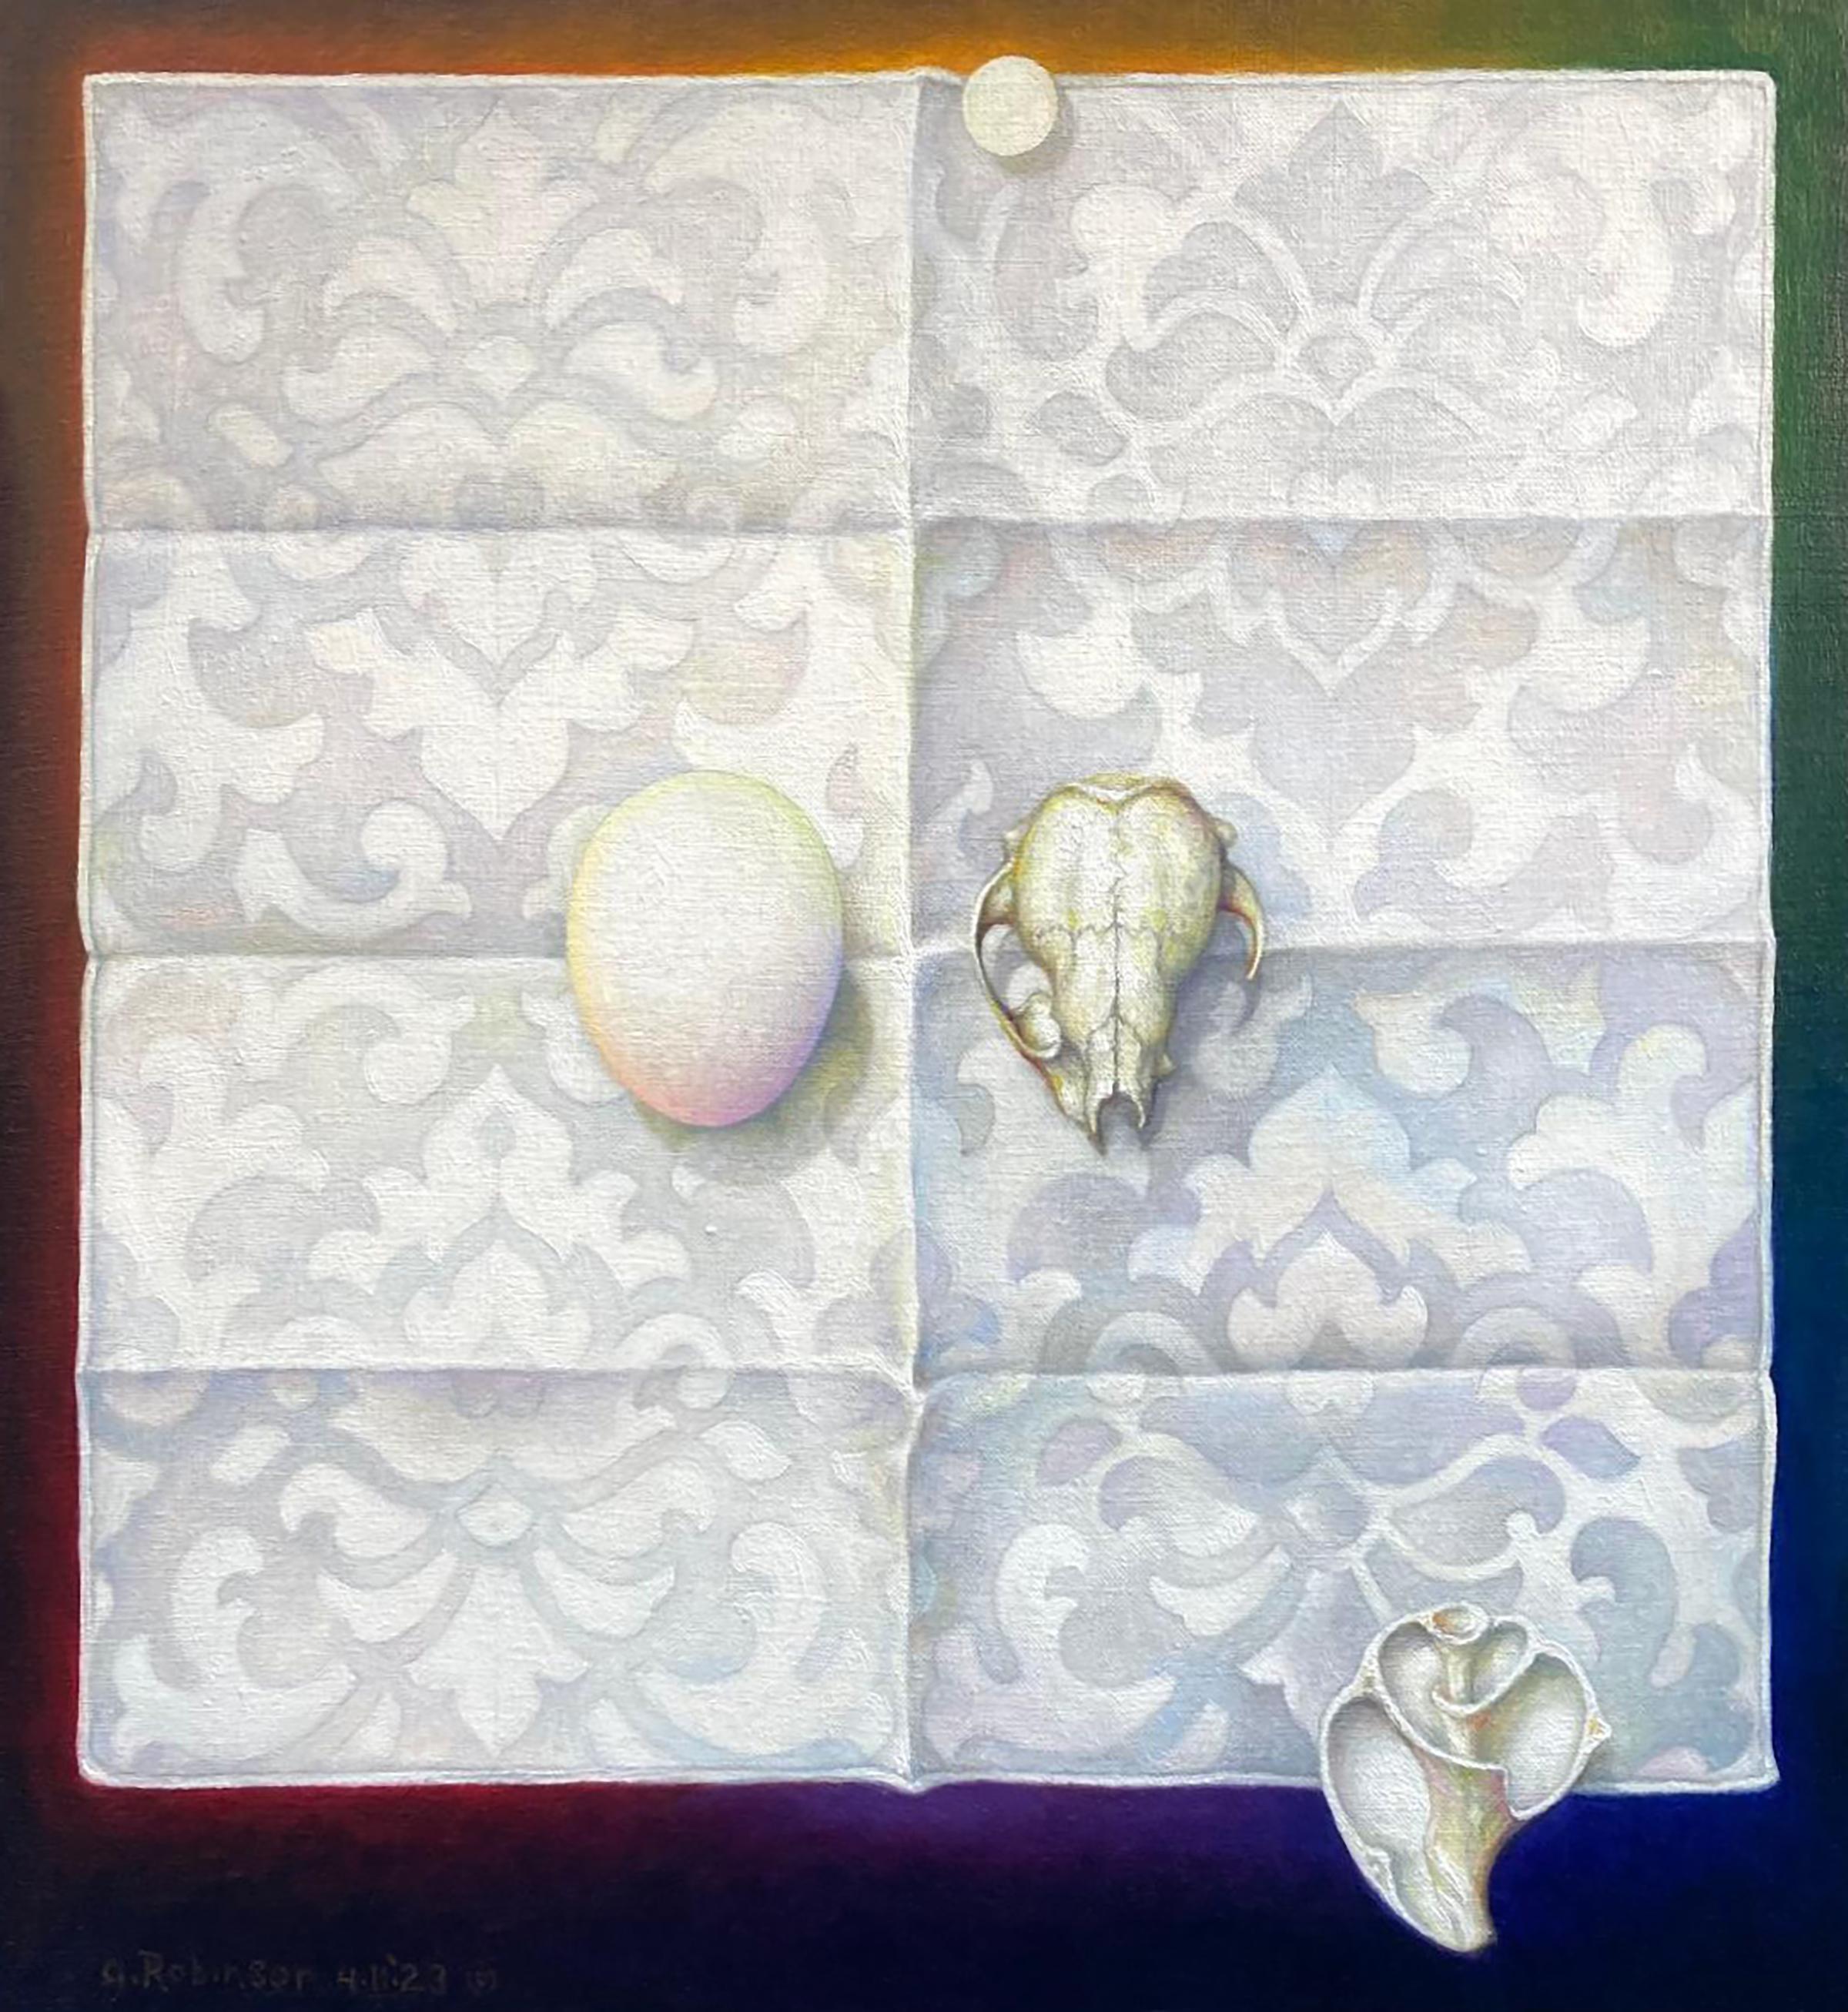 Guy Robinson Still-Life Painting - "Small Study in White" - surrealist still life, lace, skull, patterns, shell